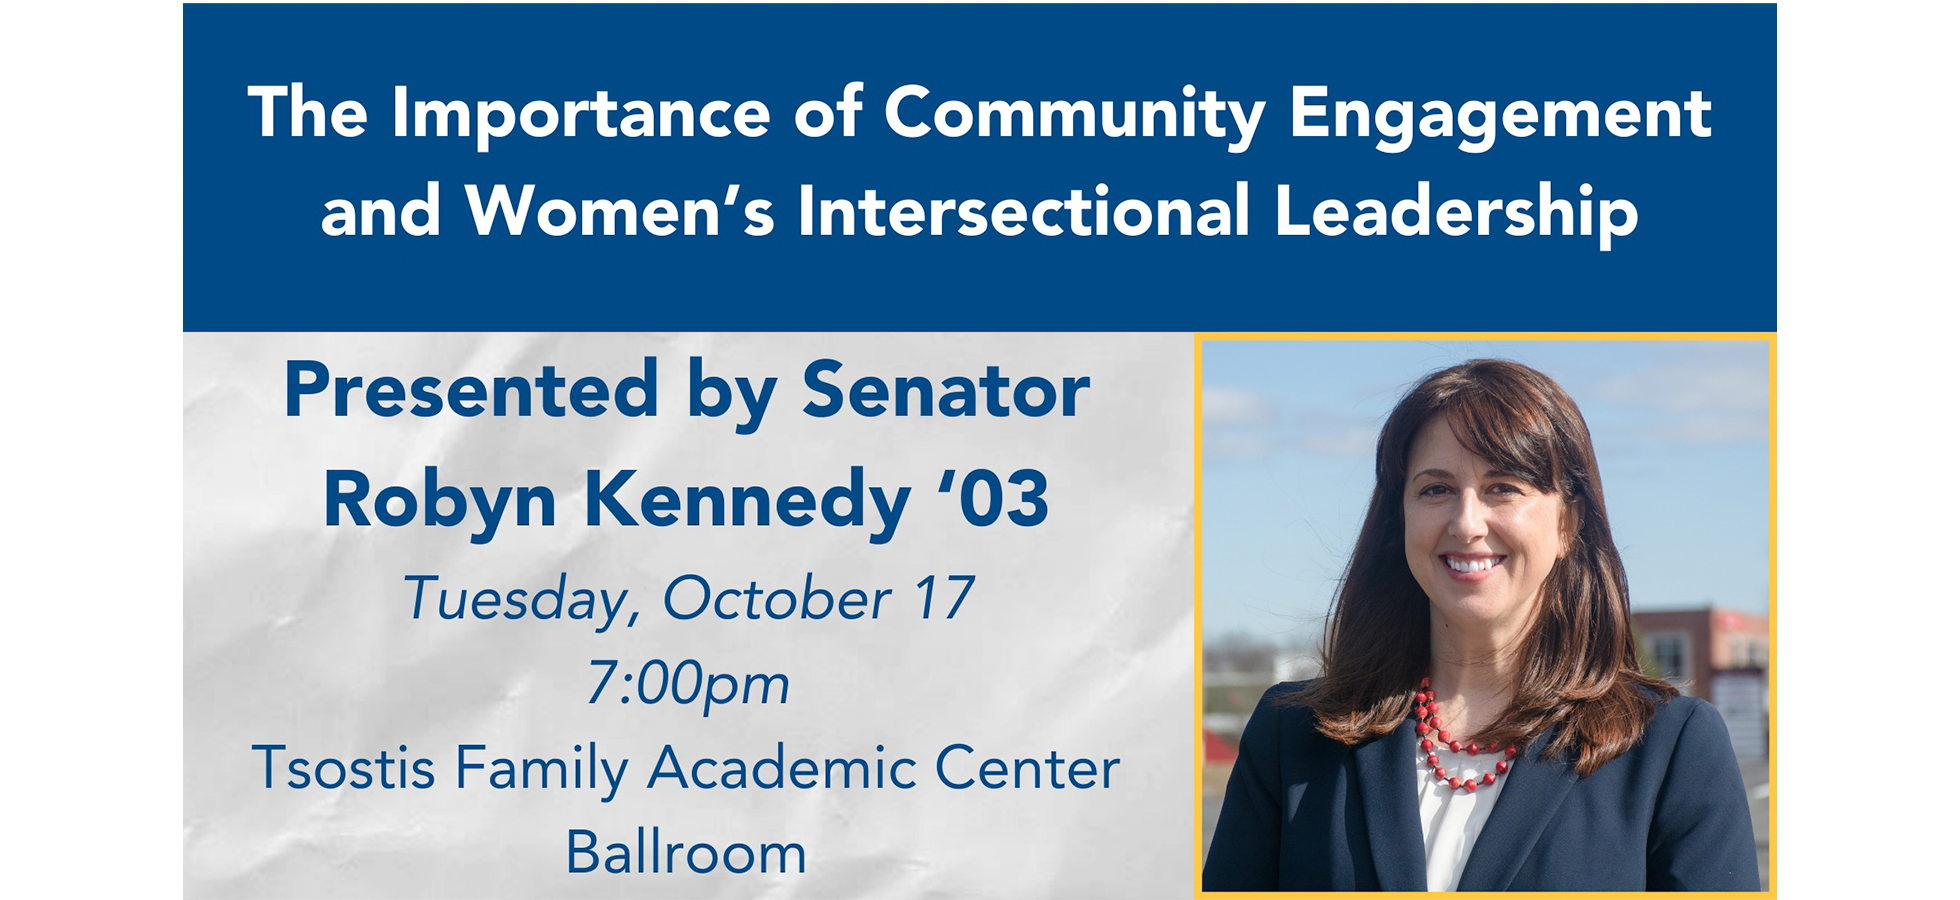 The Assumption community is invited to campus for a captivating lecture by Senator Robyn Kennedy '03 as she discusses "The Importance of Community Engagement and Women’s Intersectional Leadership." Senator Kennedy, representing the First Worcester District, has dedicated her career to addressing issues such as the care economy, workforce development, and equity. Her talk promises to inspire and educate.   Don't miss this opportunity to hear from an accomplished Assumption alumna shaping positive change.